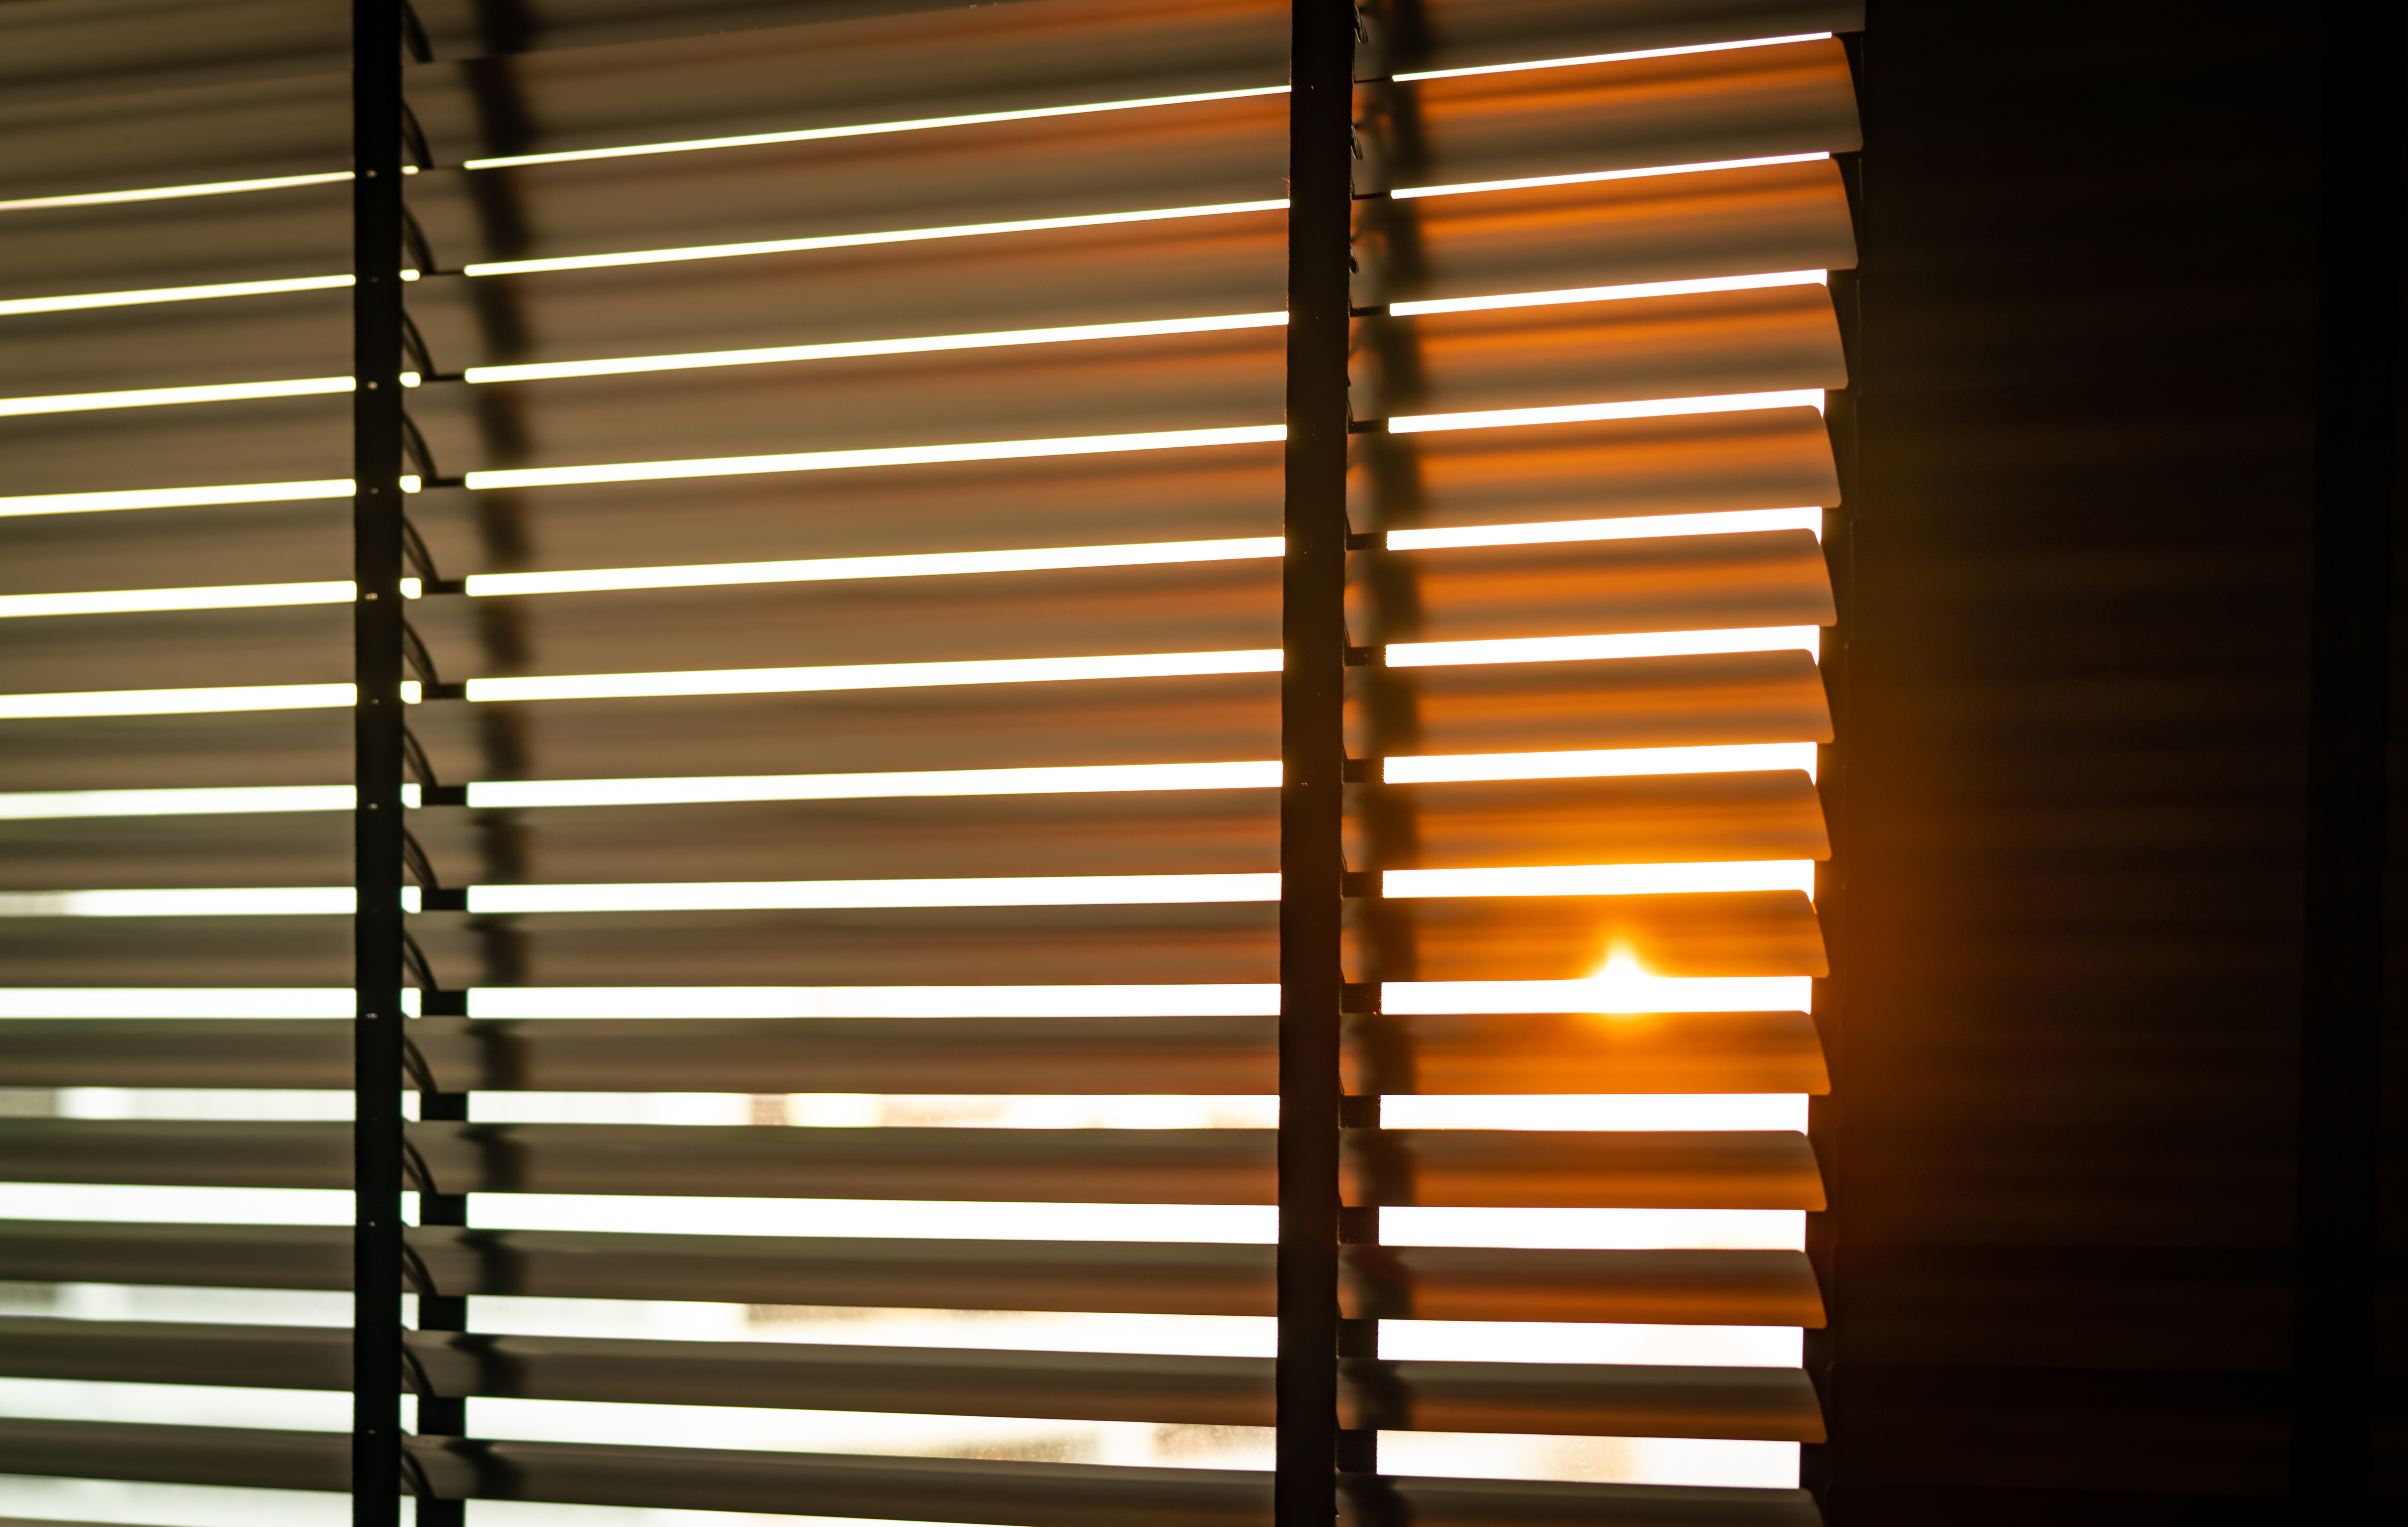 Opened venetian plastic blinds with sunlight in the morning. White plastic window with blinds. Interior design of living room with window horizontal blinds. Window slatted shades made of plastic.